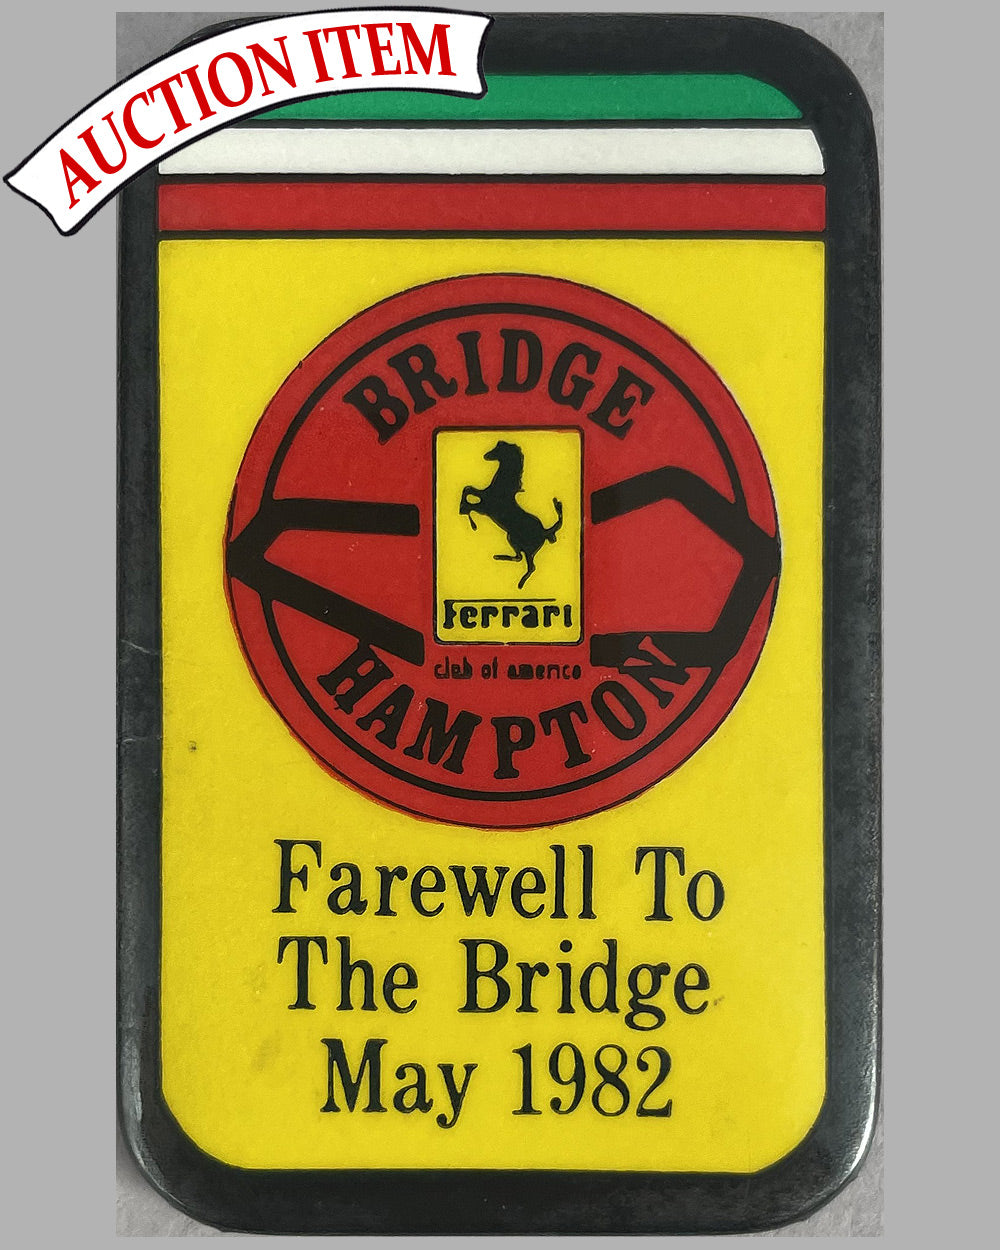 8 - Farewell to the Bridge, May 1982 button